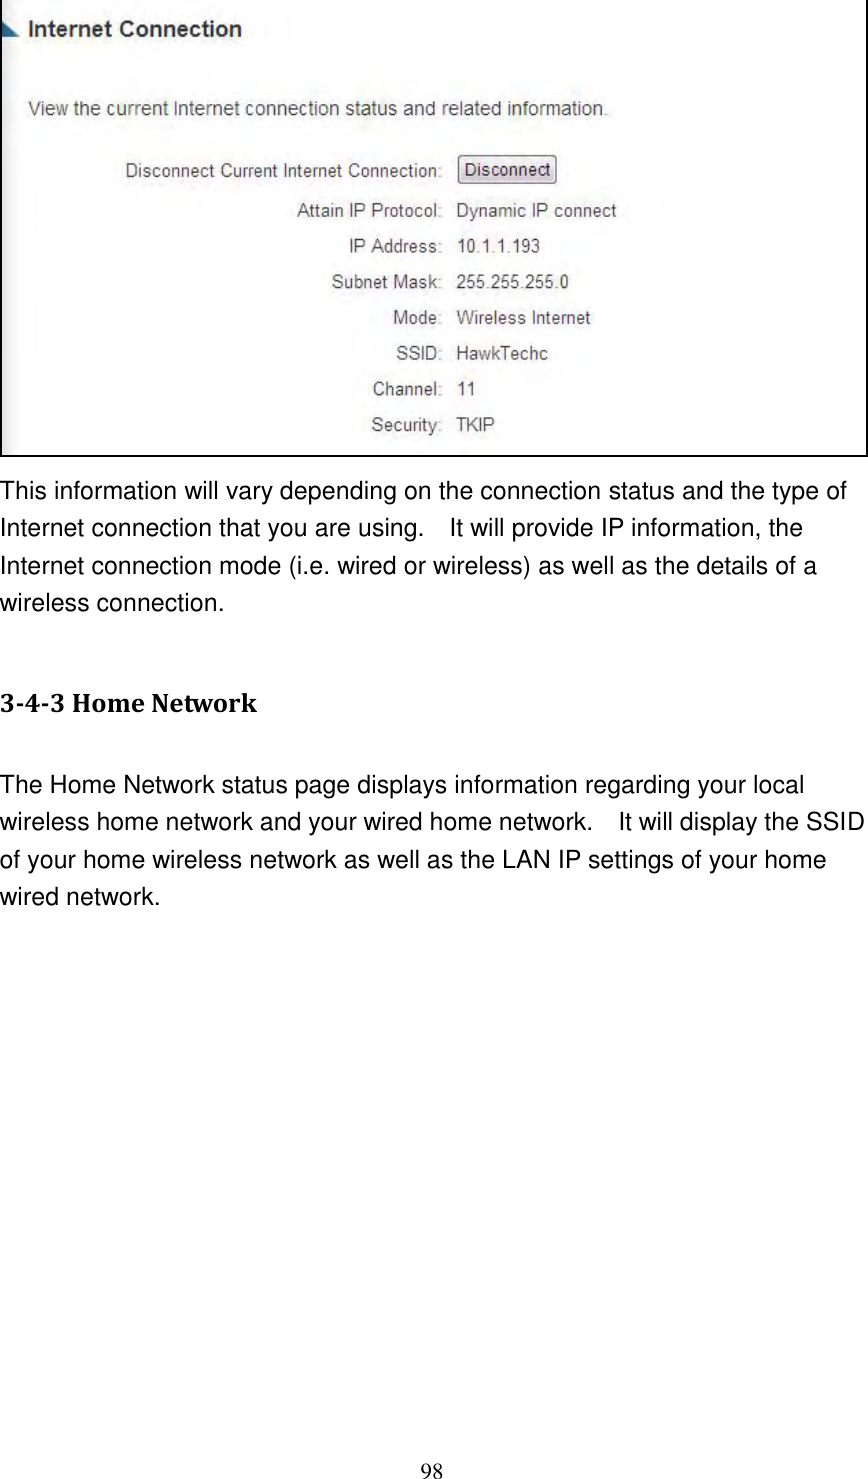 98  This information will vary depending on the connection status and the type of Internet connection that you are using.    It will provide IP information, the Internet connection mode (i.e. wired or wireless) as well as the details of a wireless connection.  3-4-3 Home Network  The Home Network status page displays information regarding your local wireless home network and your wired home network.    It will display the SSID of your home wireless network as well as the LAN IP settings of your home wired network.  